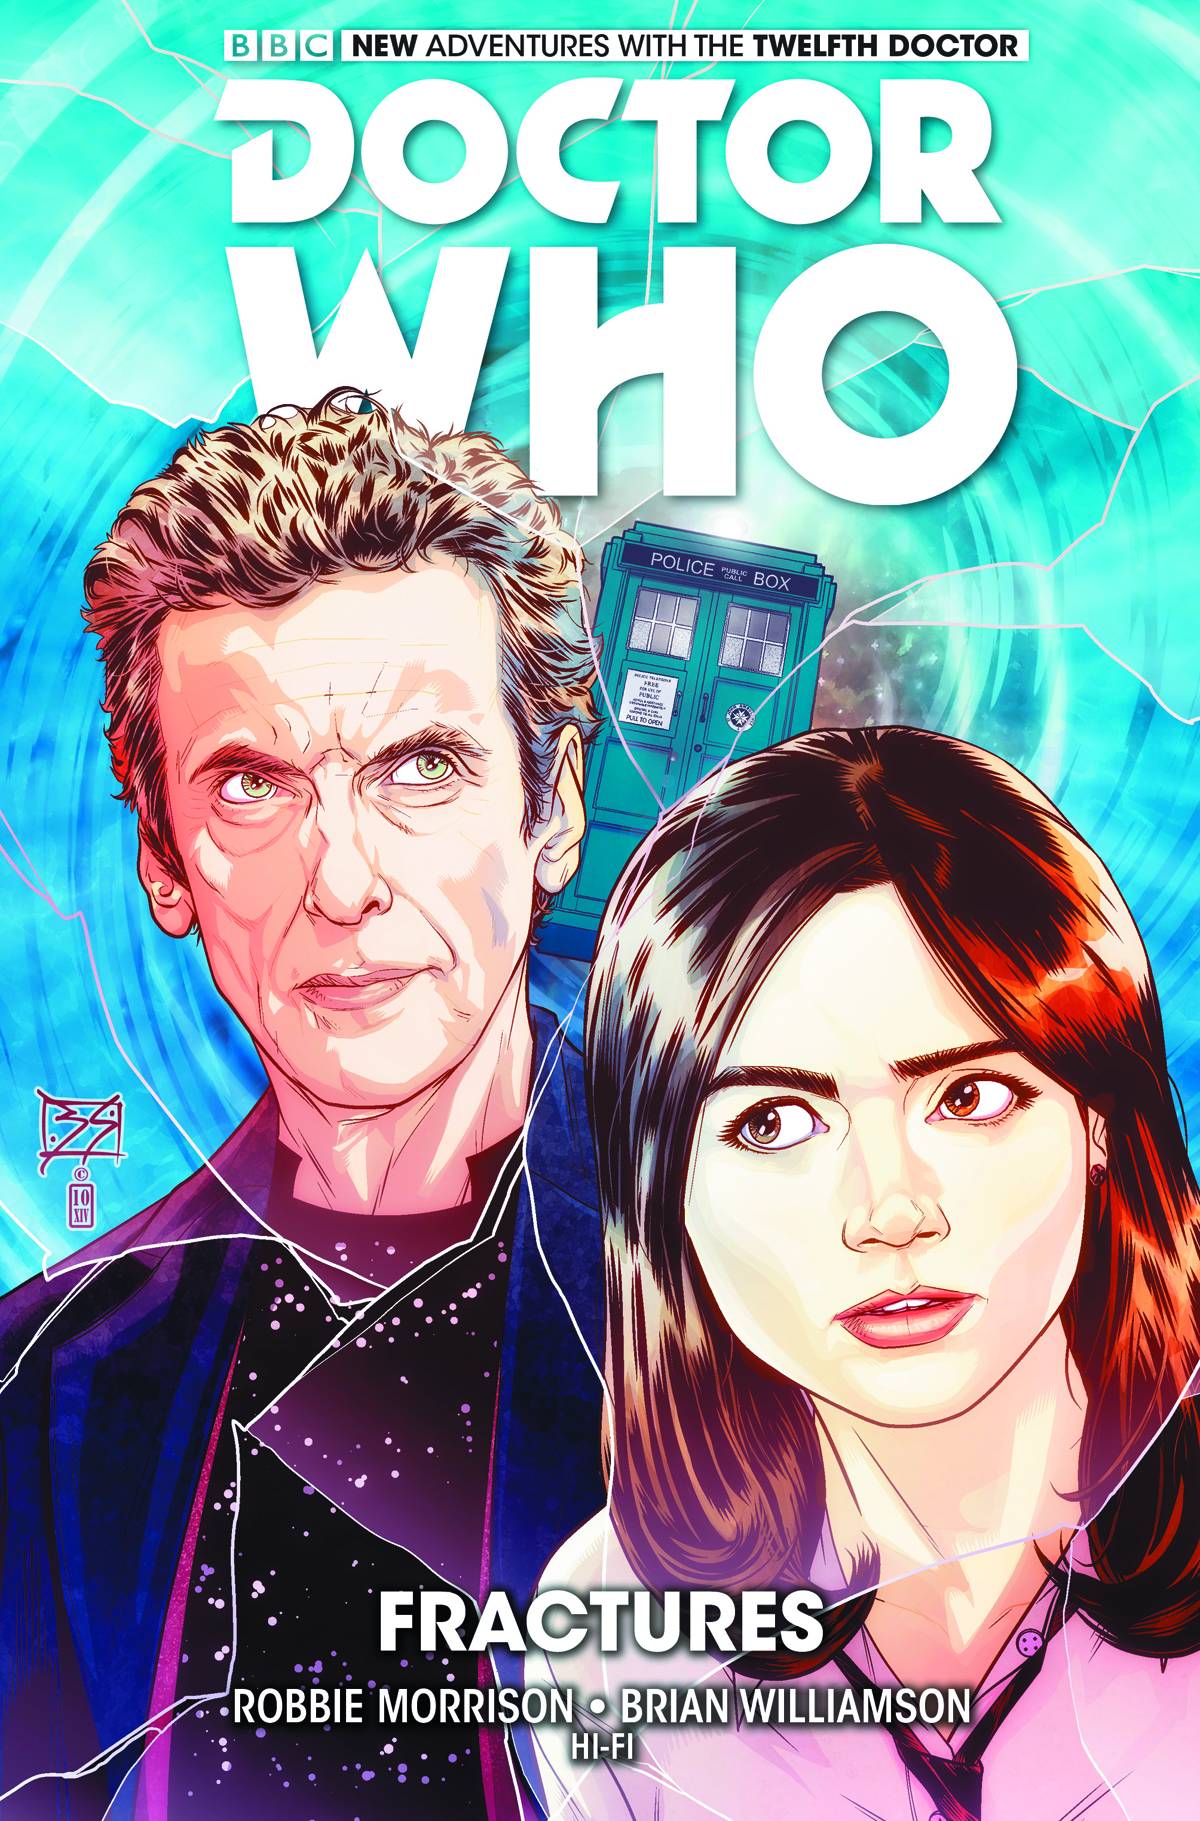 Doctor Who 12th Doctor Hardcover Graphic Novel Volume 2 Fractures